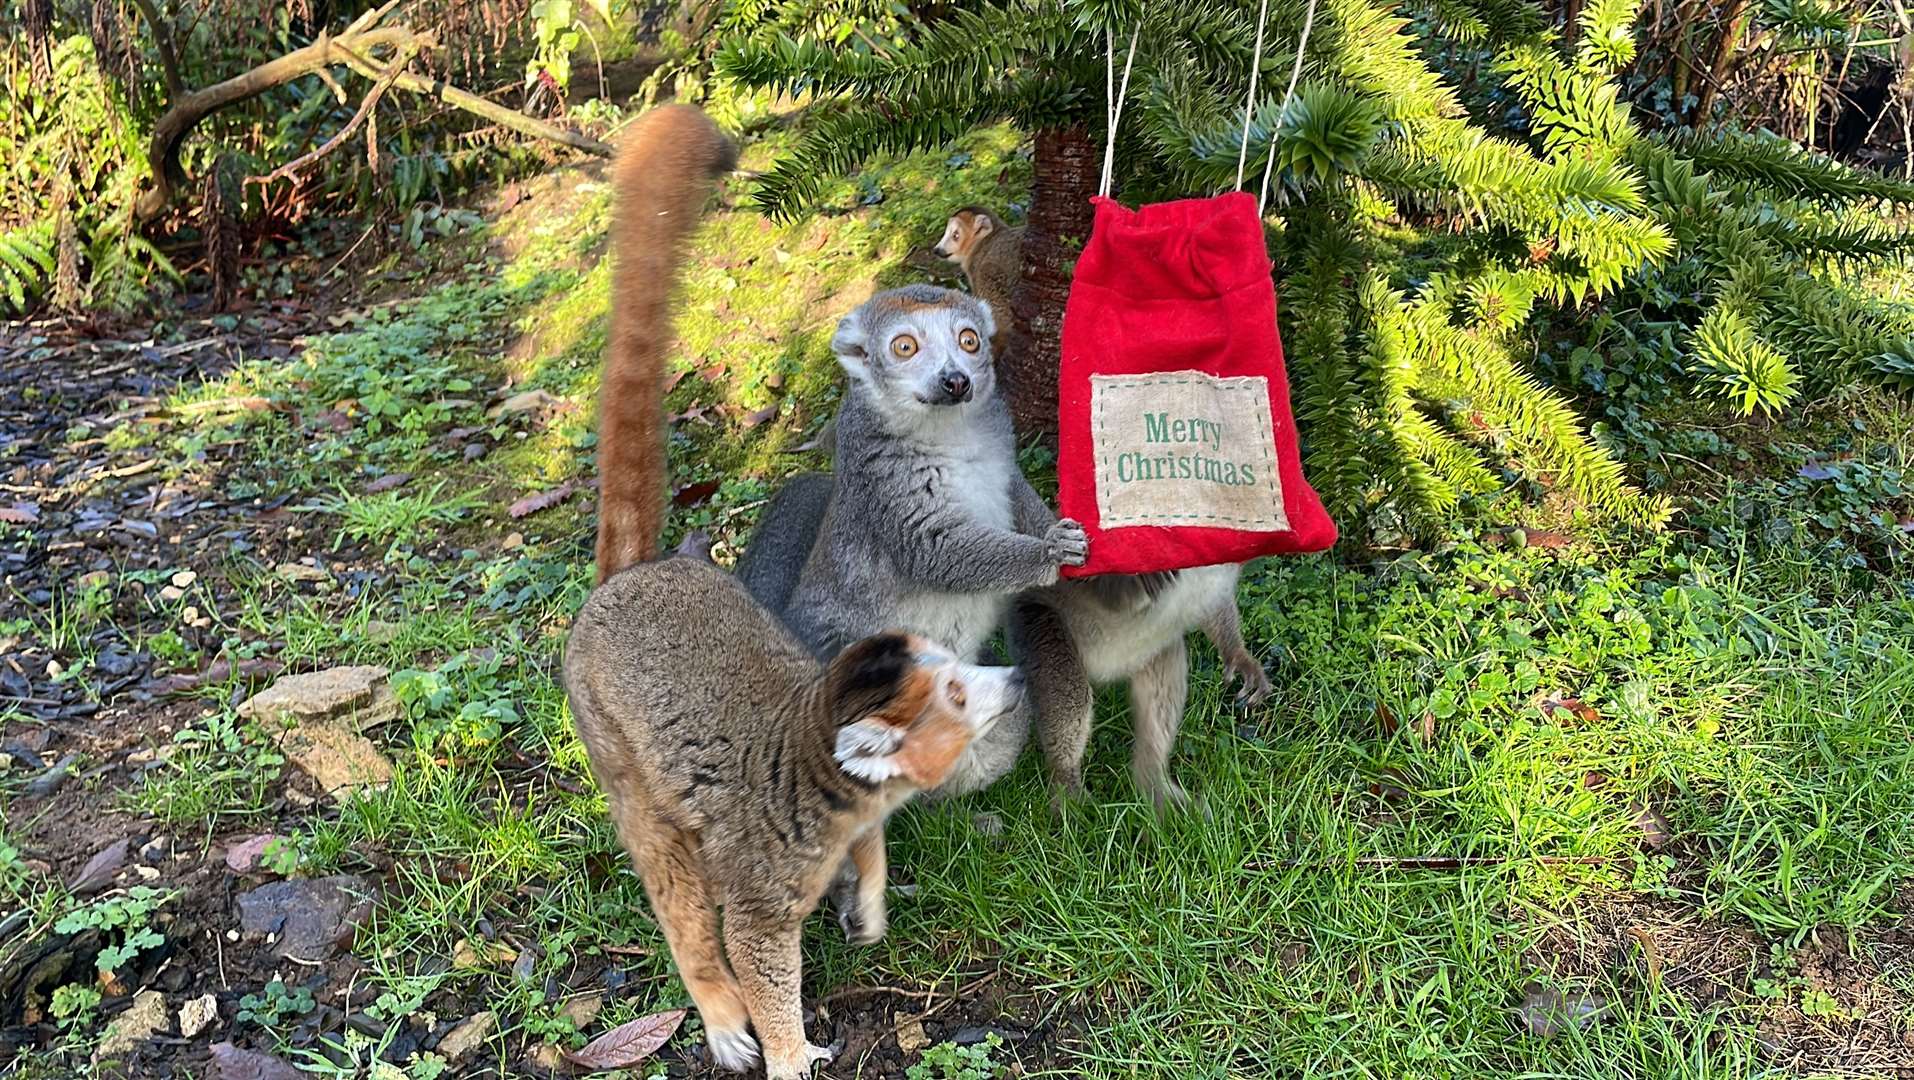 Keepers at the Cotswold Wildlife Park hung some pine cones filled with pear and grapes for them to explore and also hid some tasty treats within a Christmas sack (Cotswold Wildlife Park)